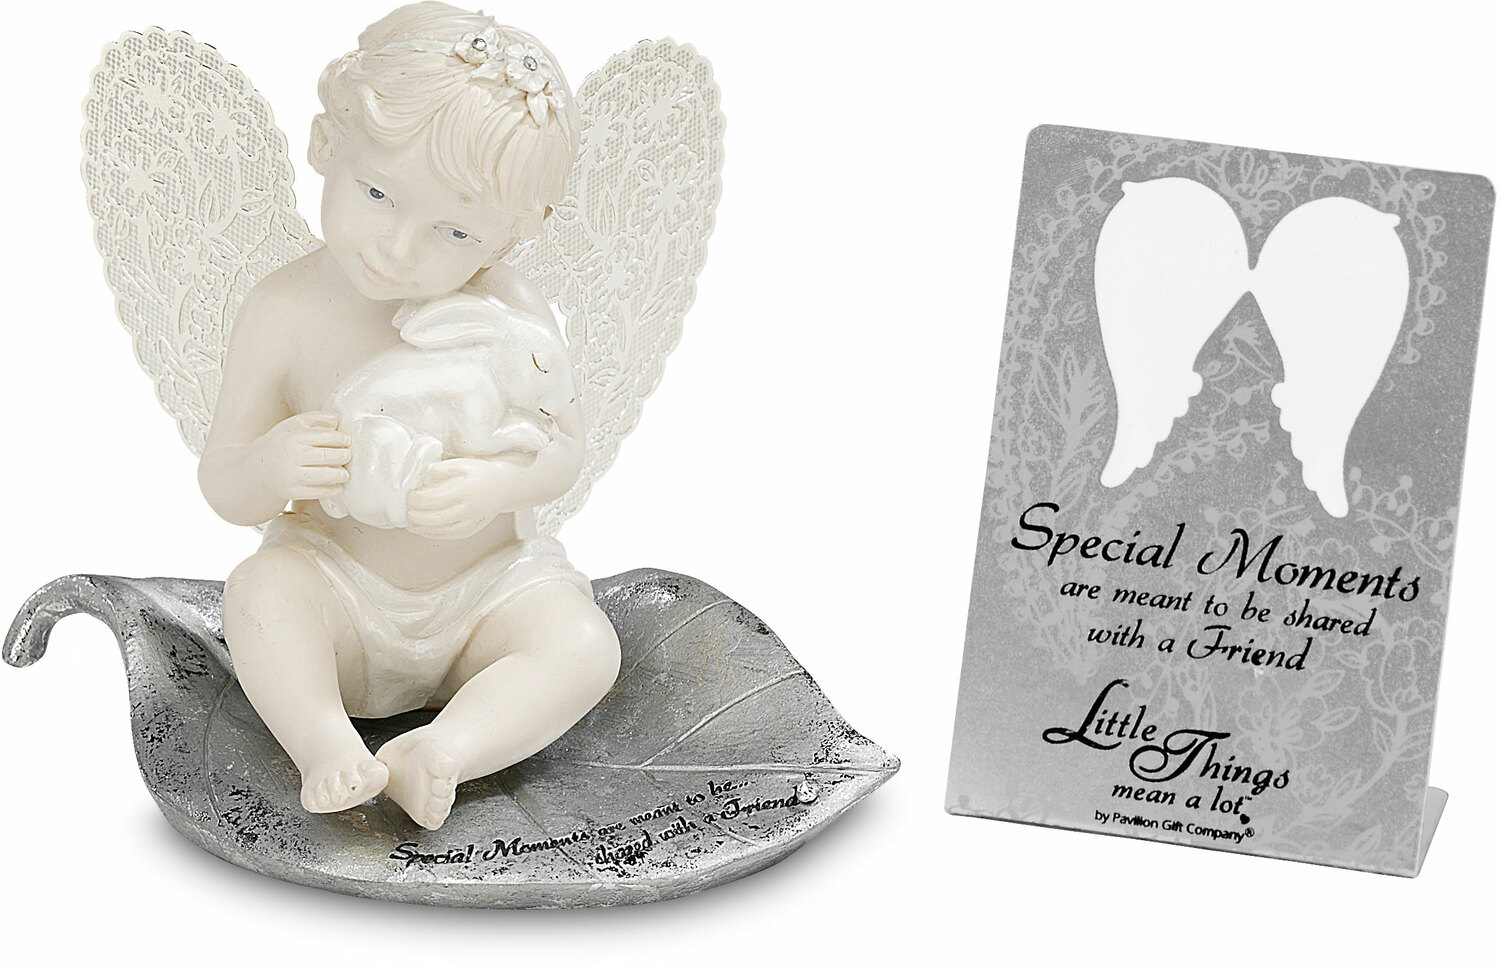 Special Moments by Little Things Mean A Lot - Special Moments - 3.5" Cherub Holding Bunny